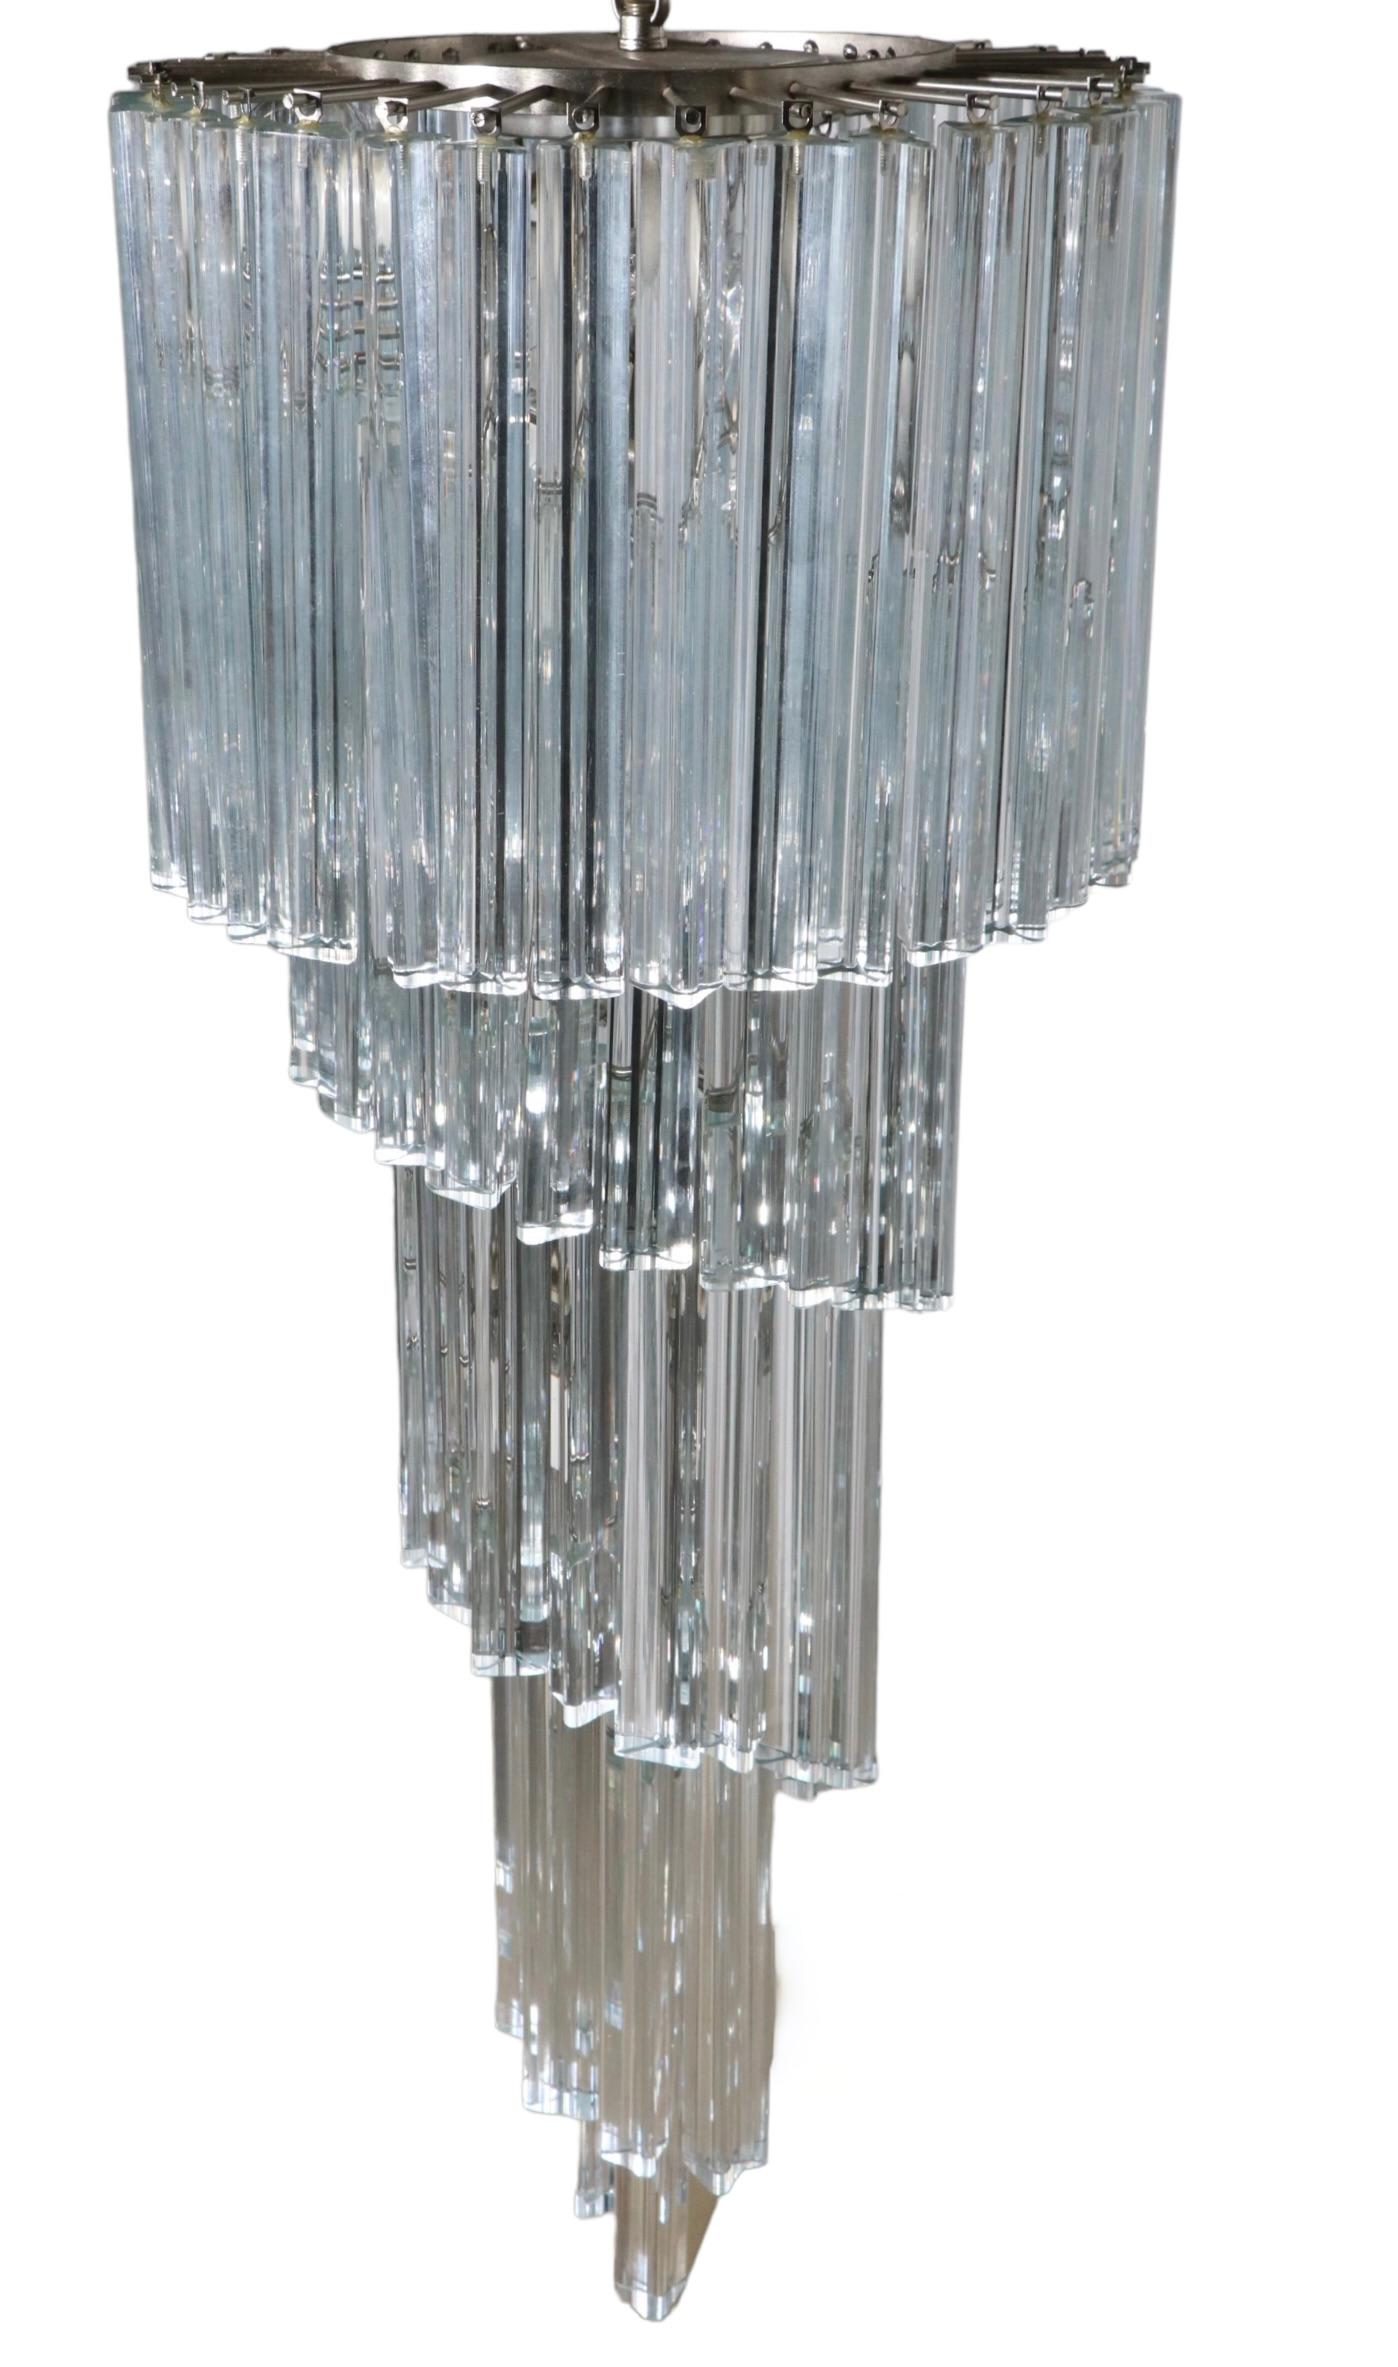 Spectacular glass chandelier of descending spiral form, having solid glass triangular ( triedi )  prisms. The fixture was produced in Italy, and this model is often attributed to Venini.
This example is in very good, original, clean and working